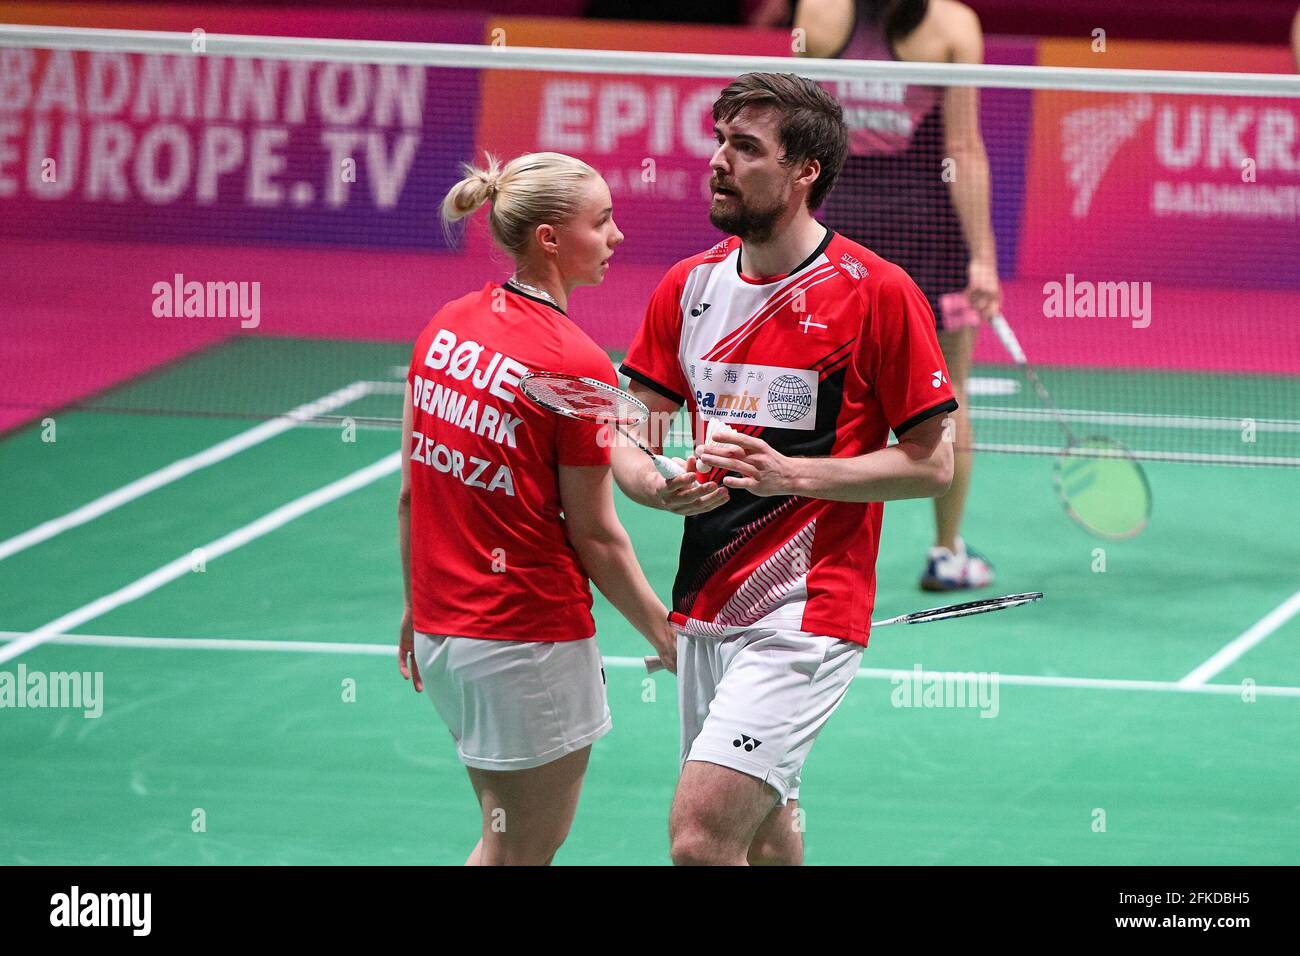 KYIV, UKRAINE - APRIL 30: Mathias Christiansen of Denmark and Alexandra Boje  of Denmark interact in their Mixed Doubles match against Ronan Labar of  France and Anne Tran of France during Day